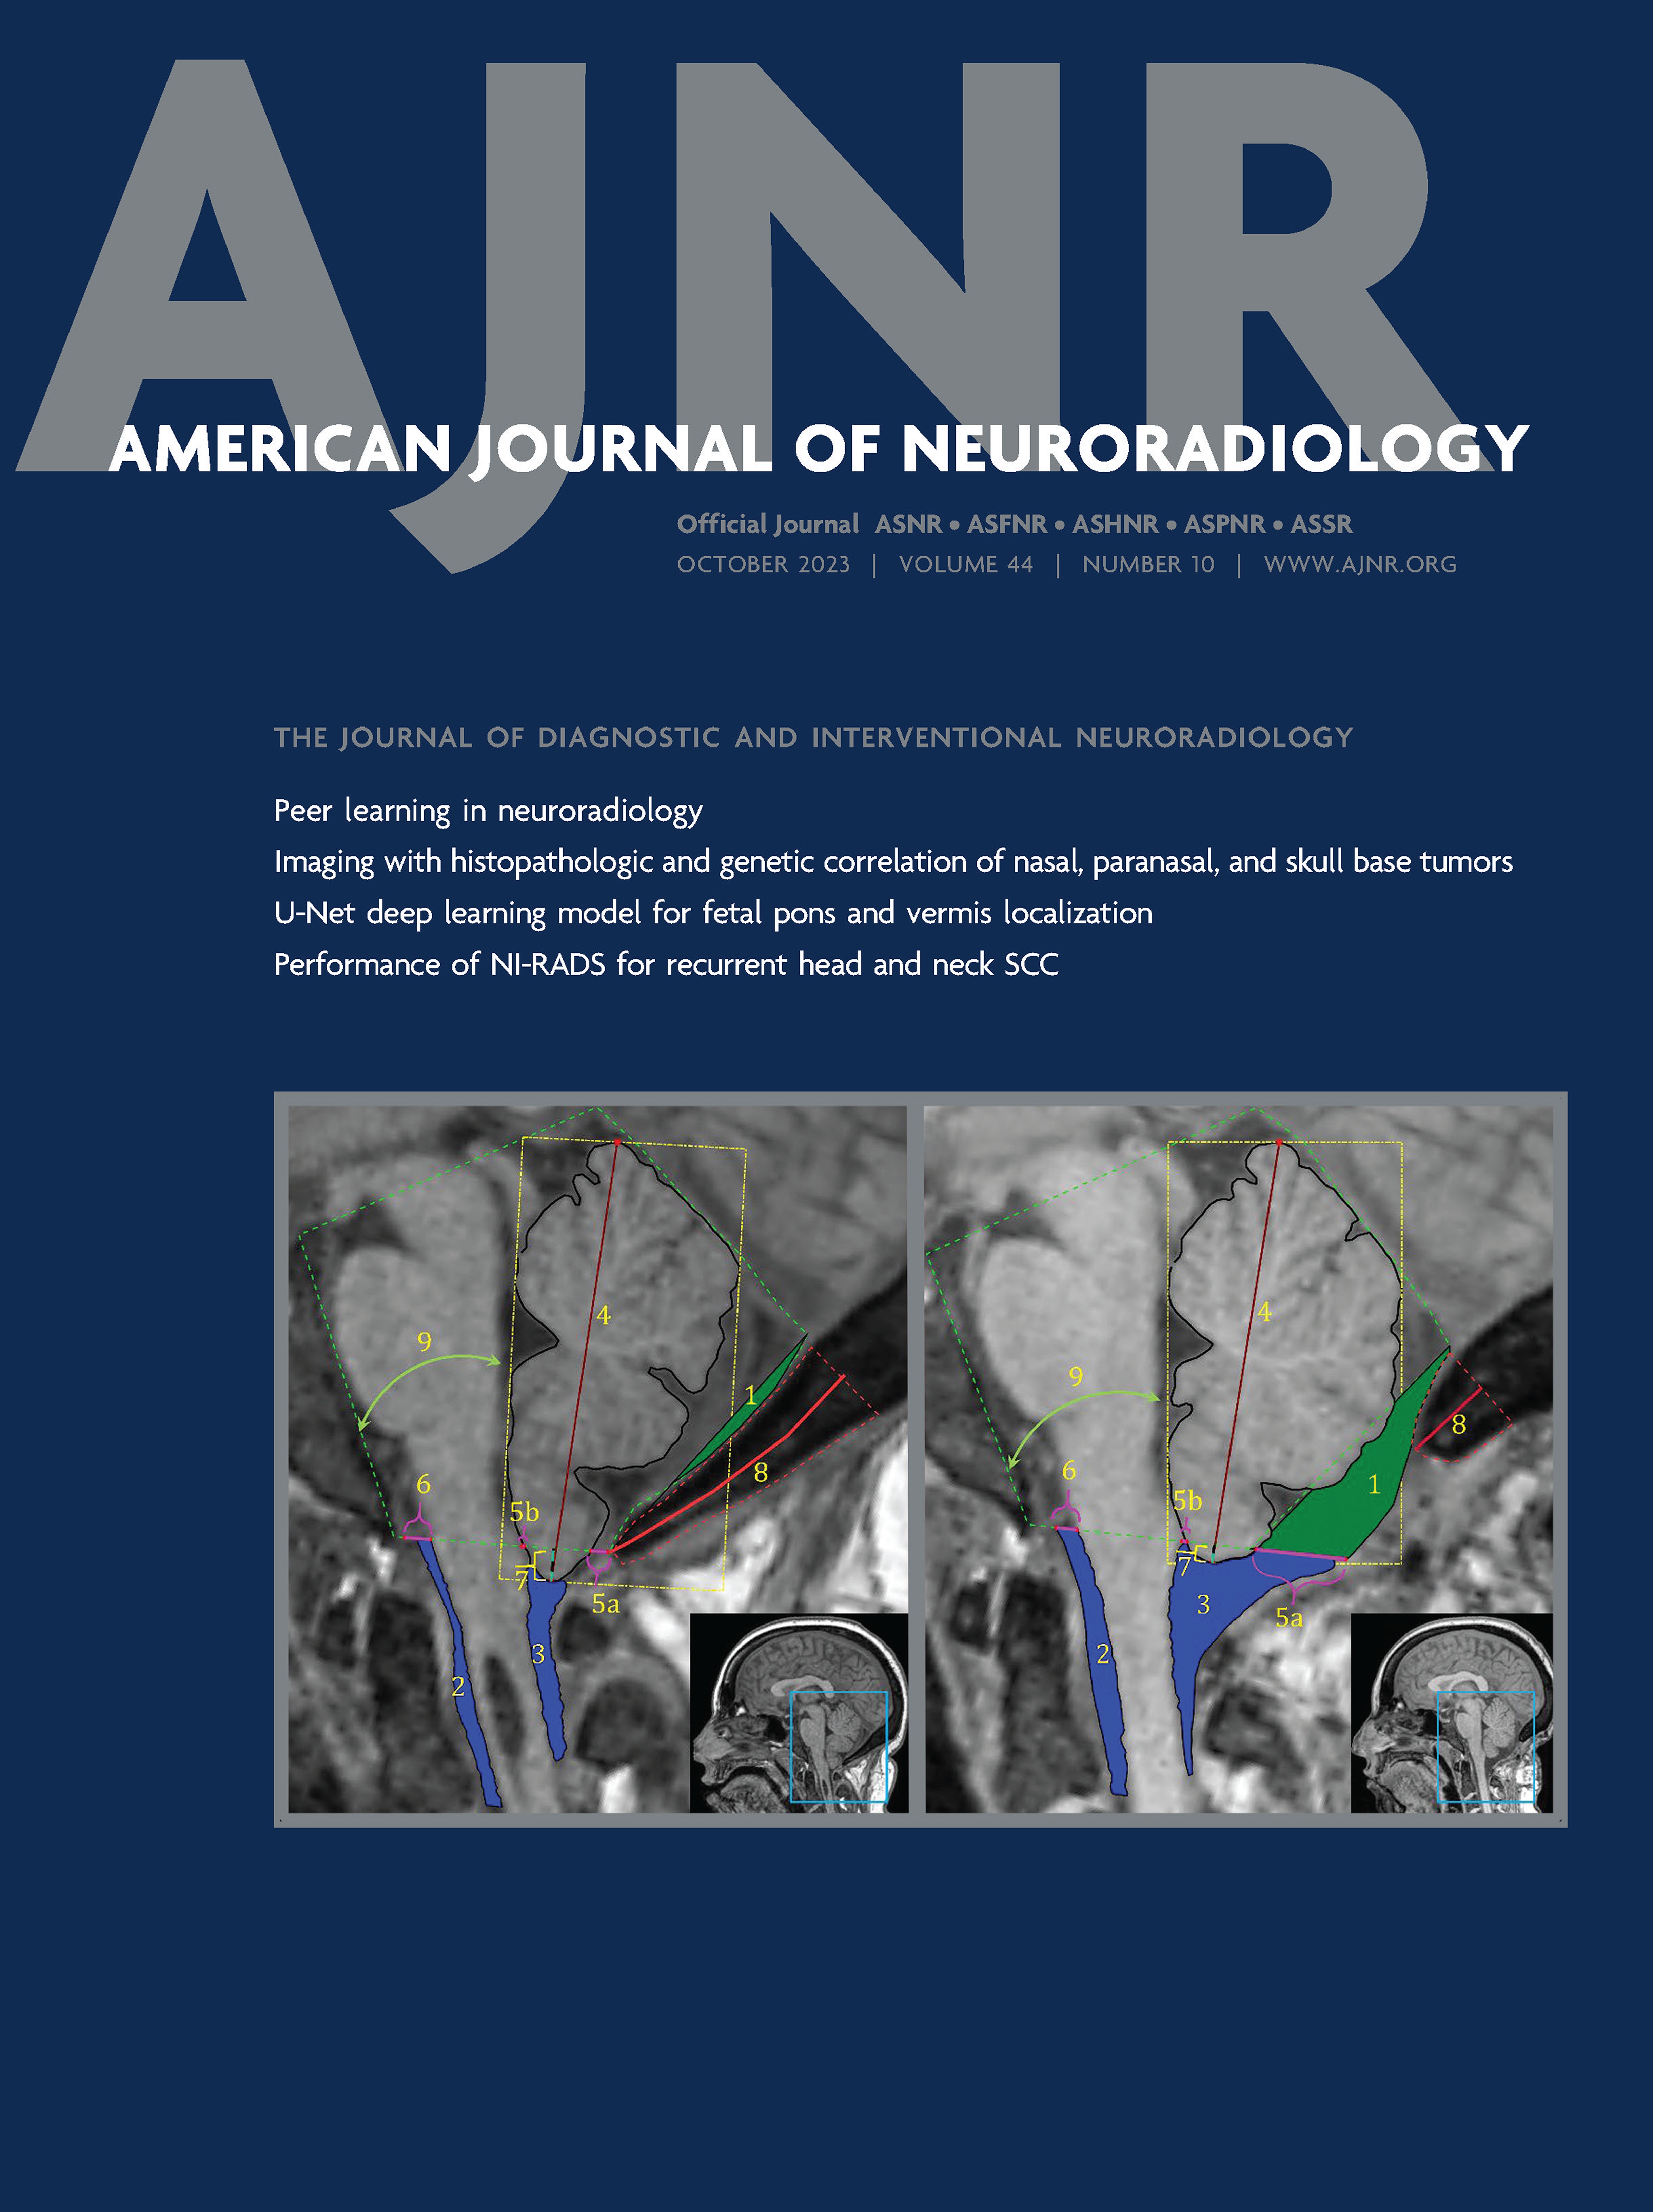 Cortical and Subcortical Brain Atrophy Assessment Using Simple Measures on NCCT Compared with MRI in Acute Stroke [ADULT BRAIN]